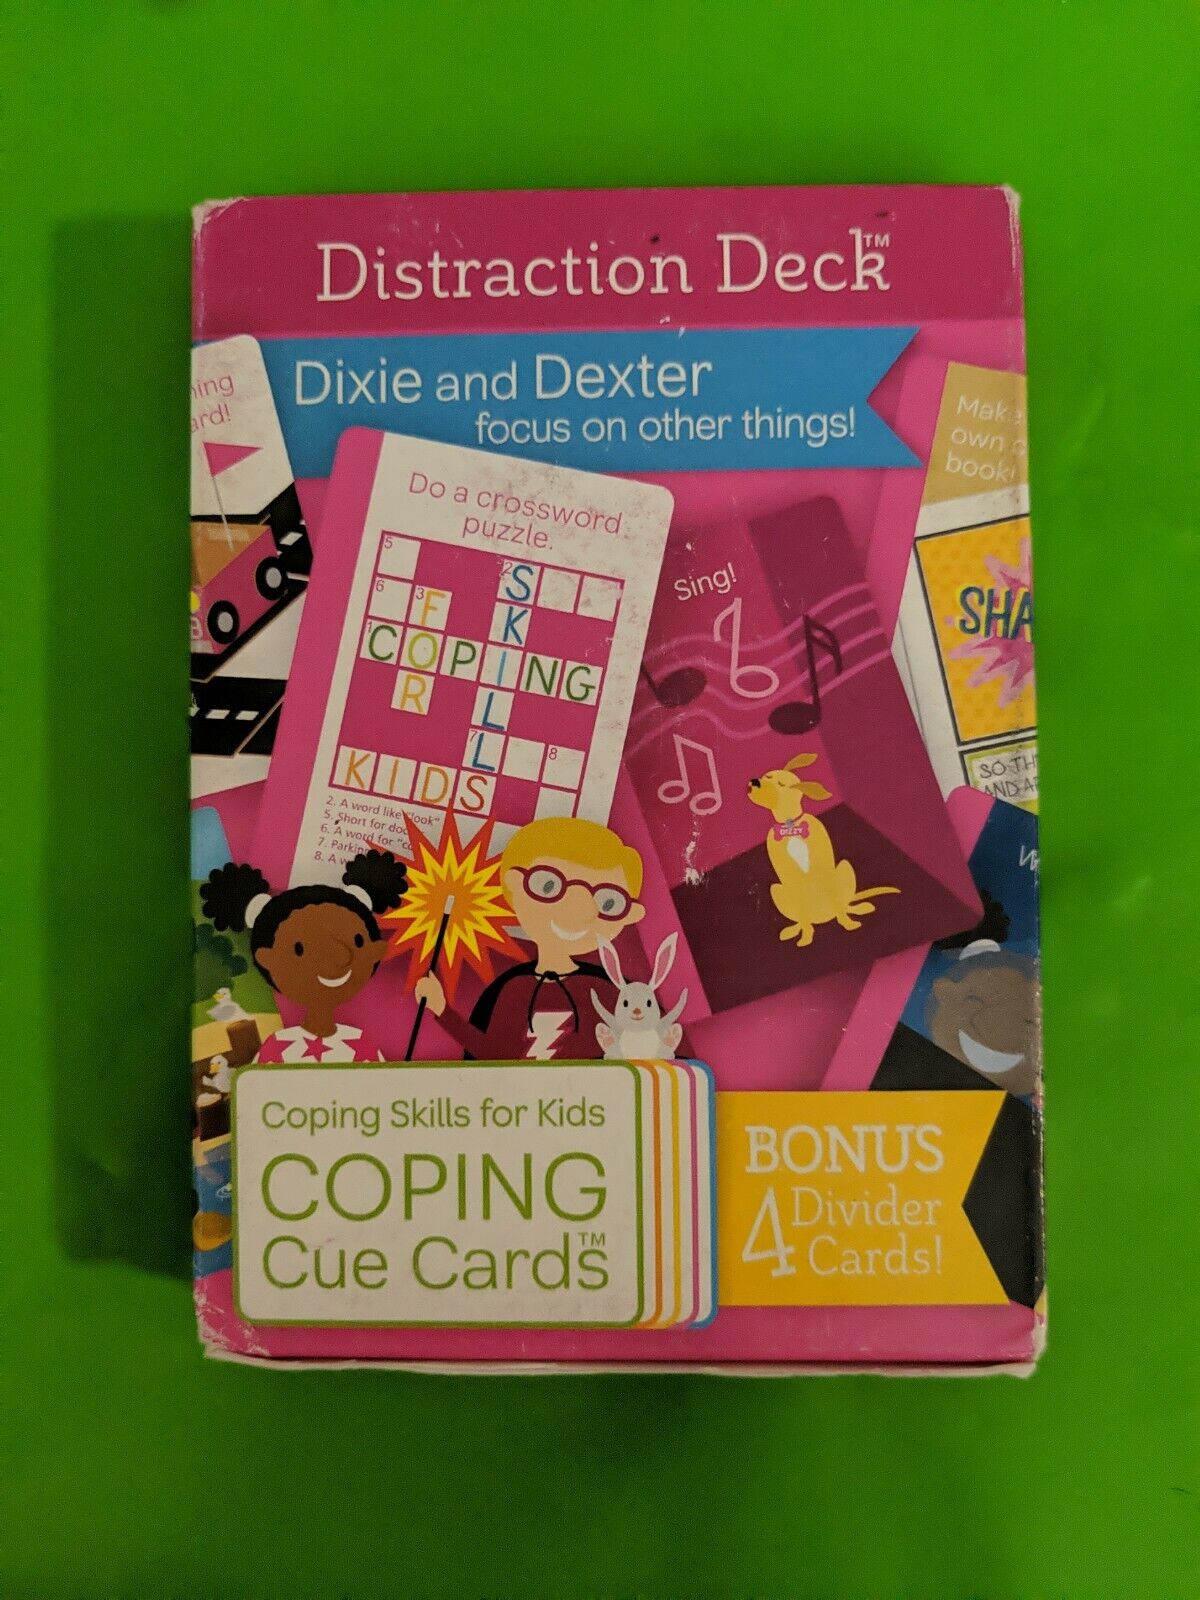 COPING SKILLS FOR KIDS Cue Cards Distraction Deck Card Game, Natural Stress R...